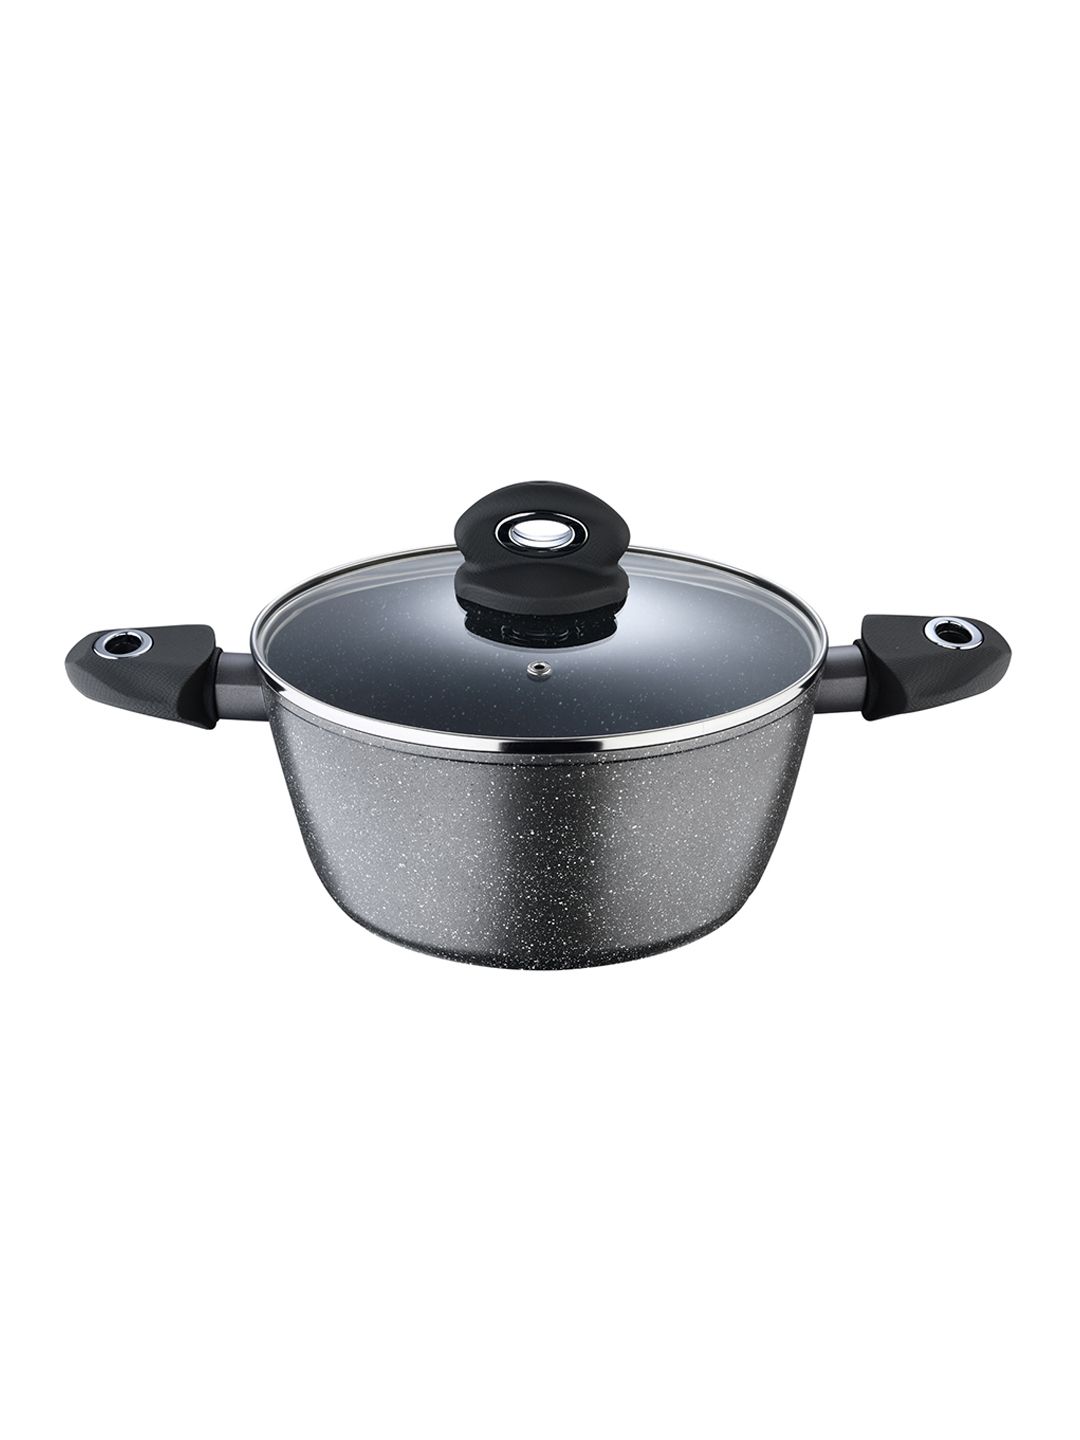 BERGNER Grey Orion Marble Non Stick Casserole with Glass Lid Price in India